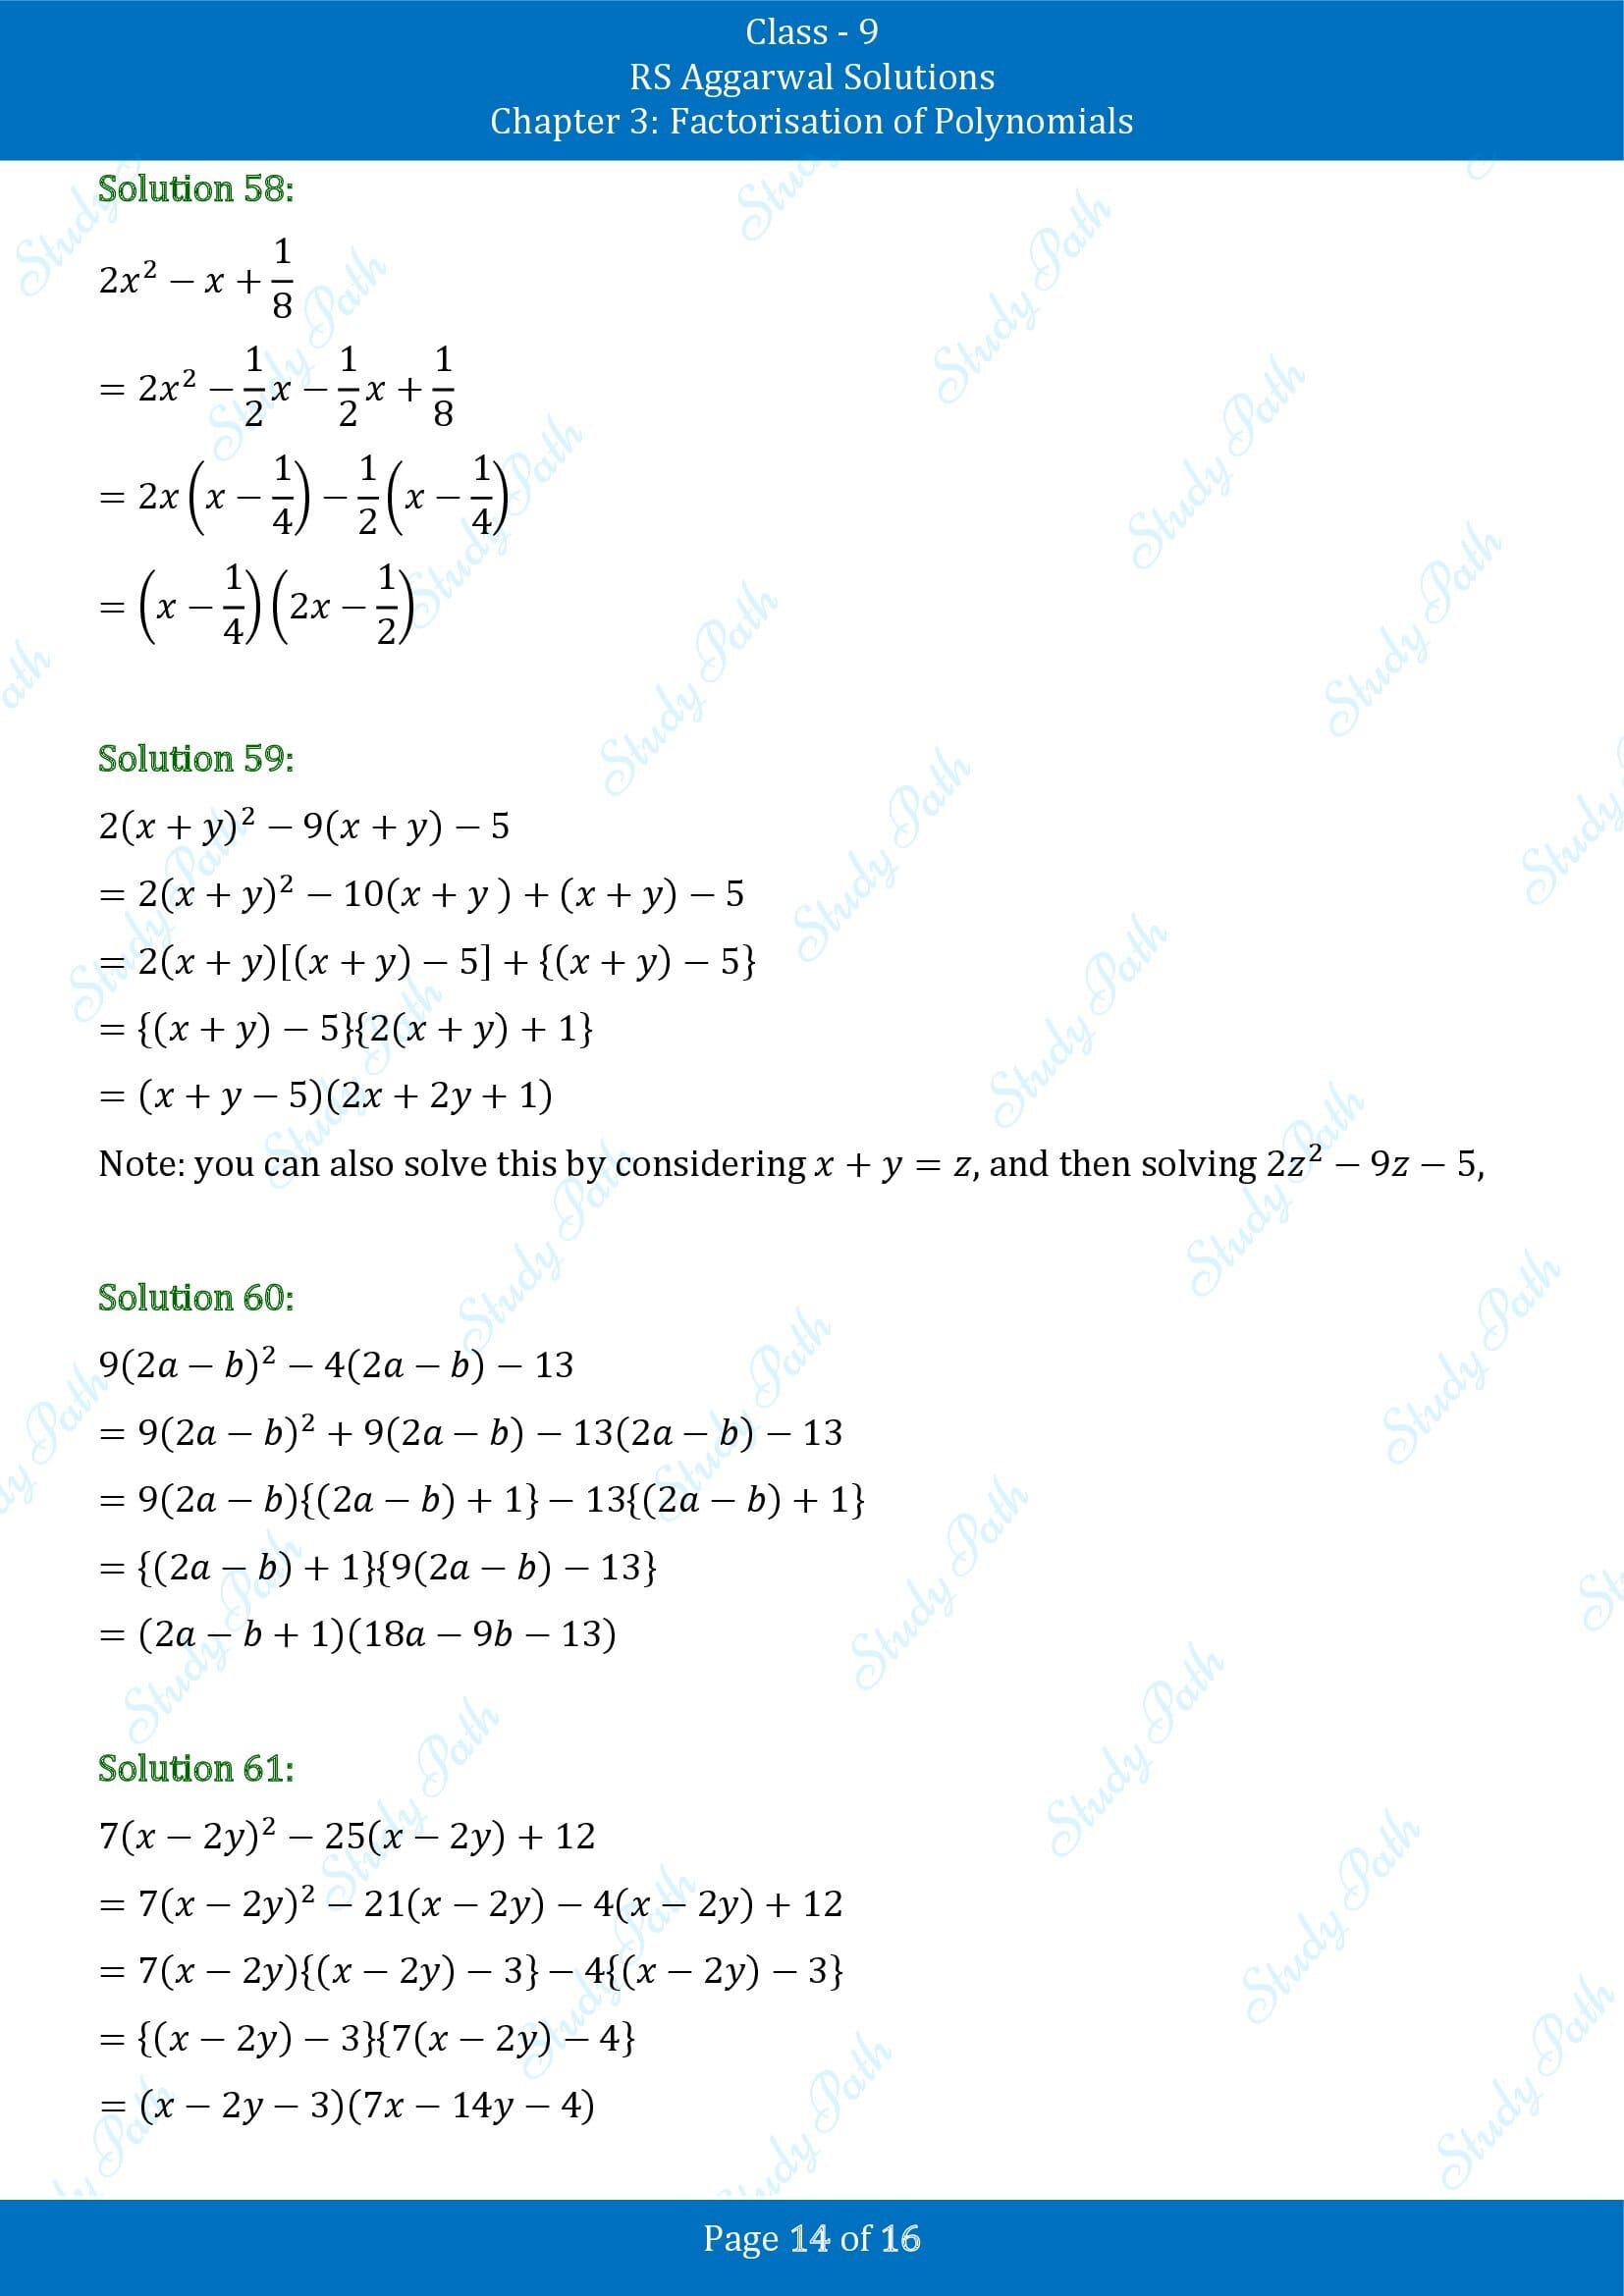 RS Aggarwal Solutions Class 9 Chapter 3 Factorisation of Polynomials Exercise 3C 00014